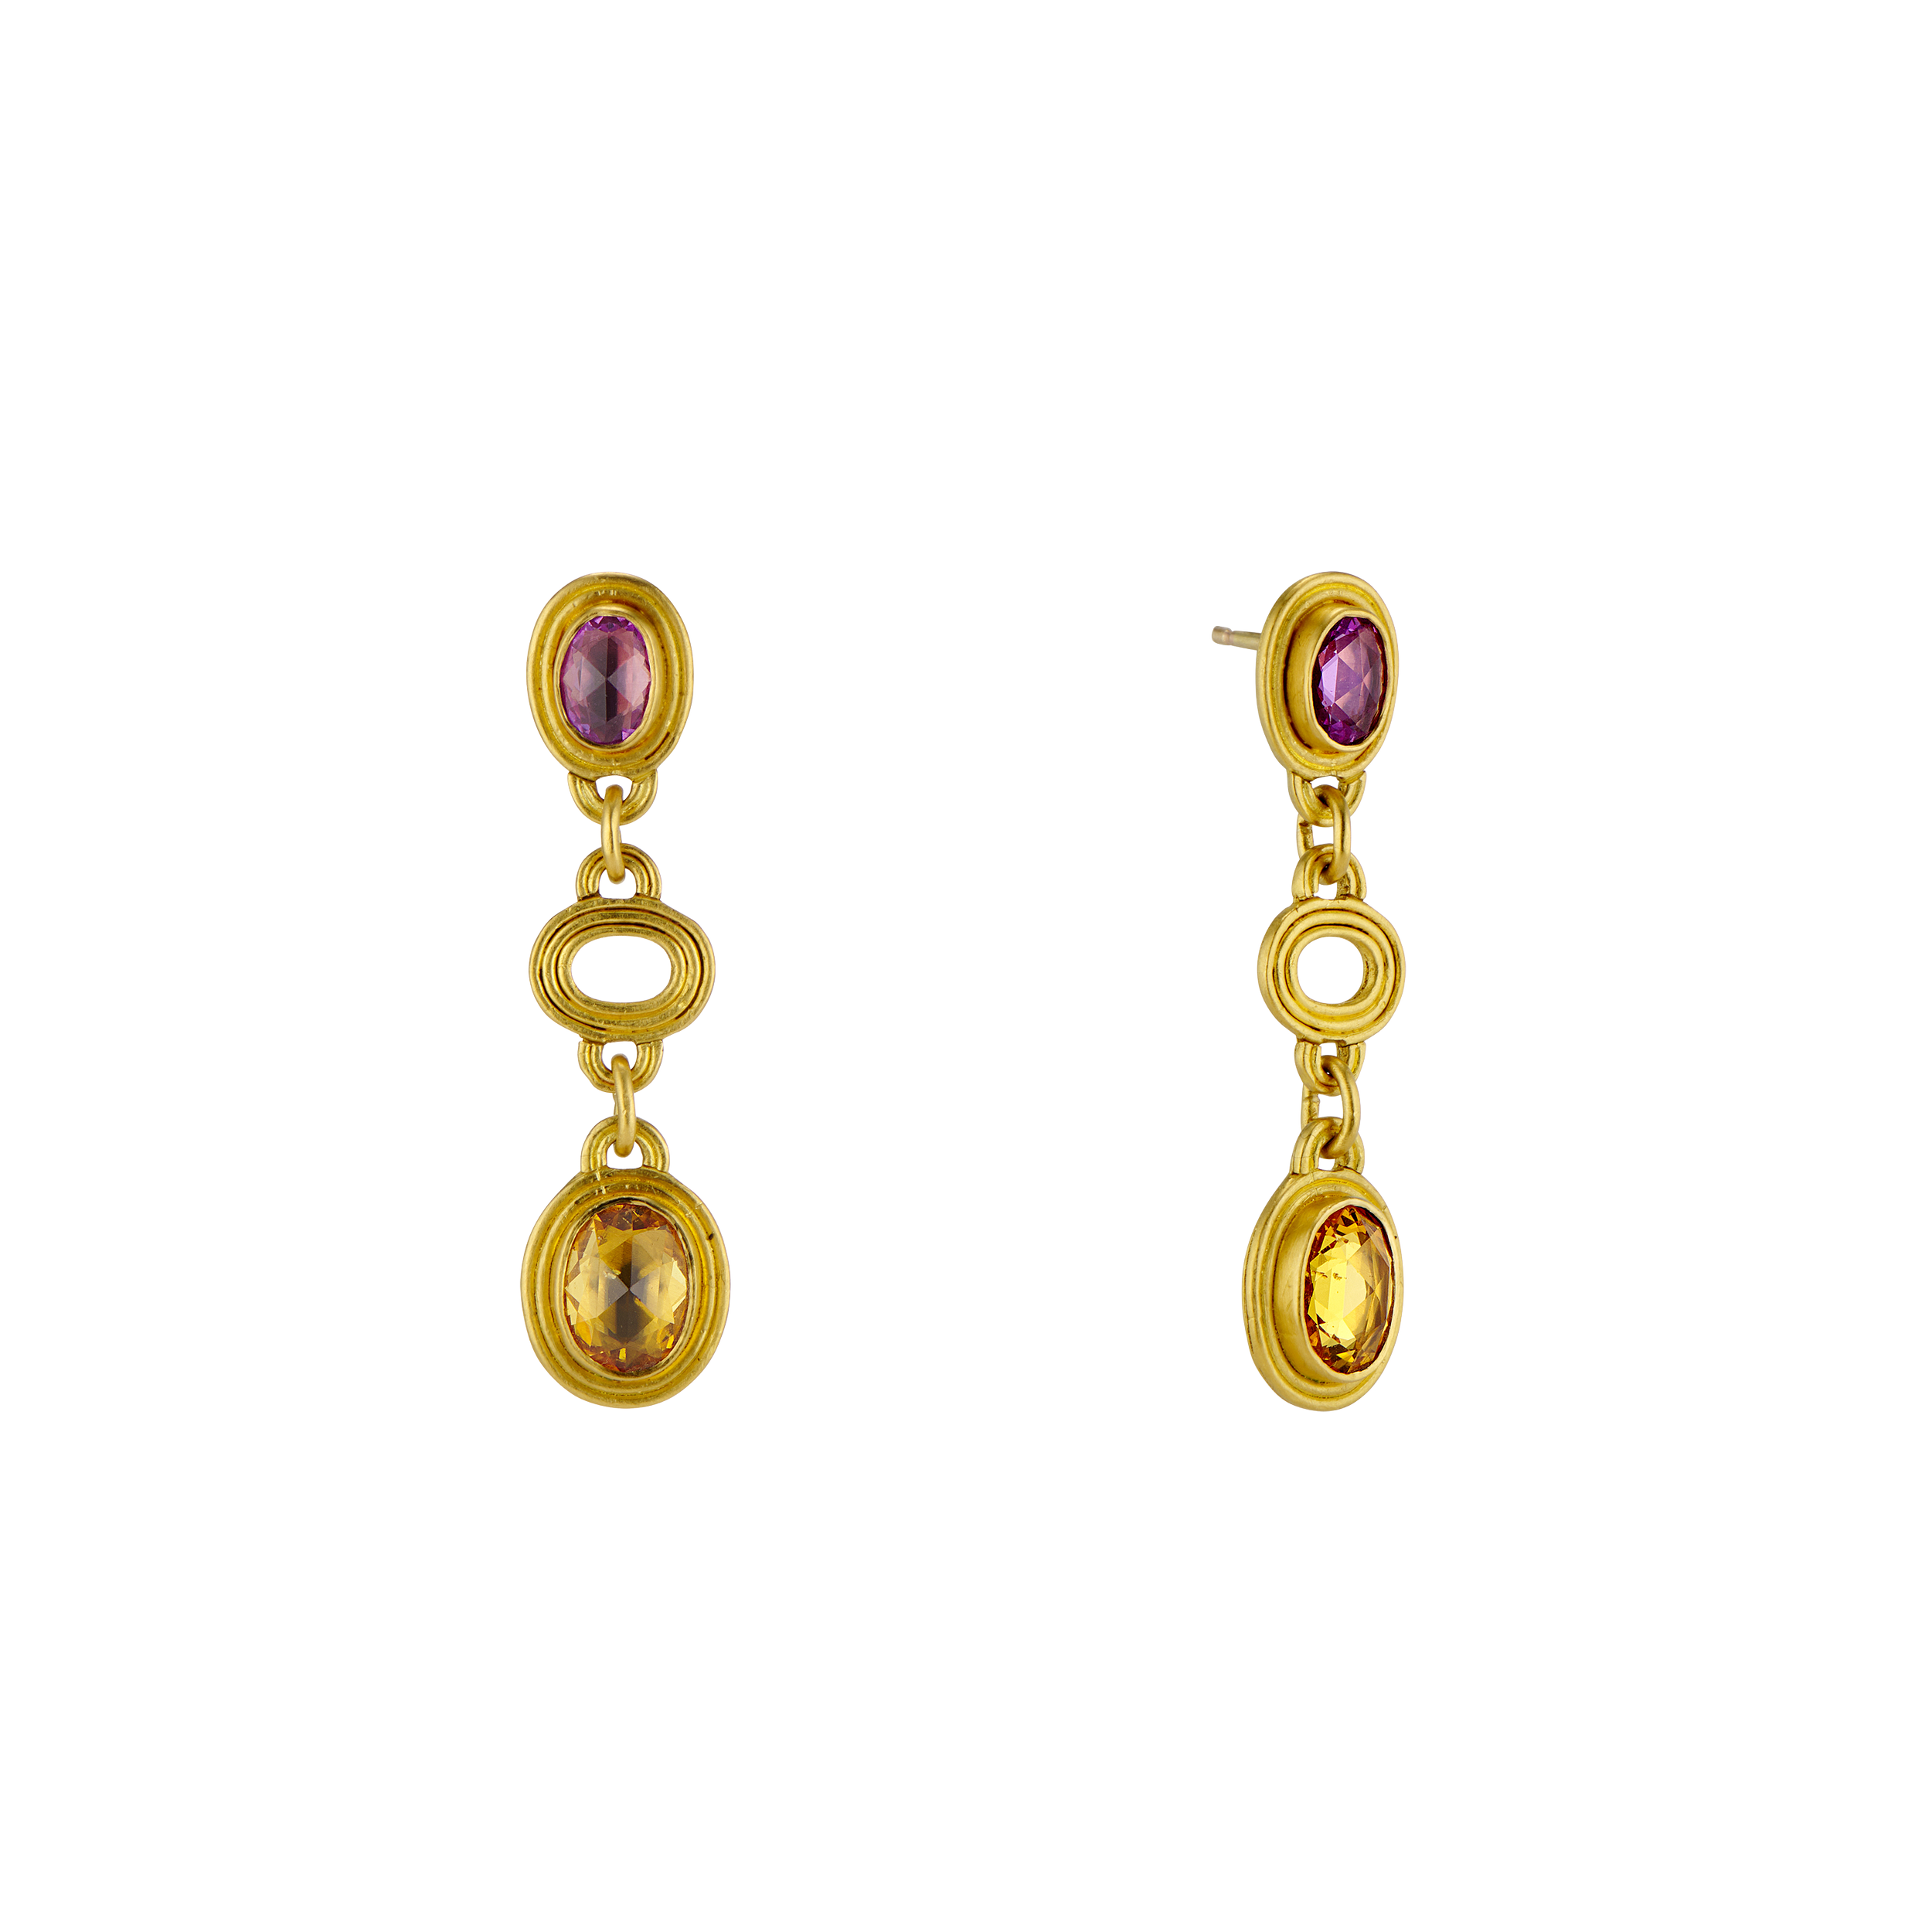 Sapphire Earrings.  These earrings are hand fabricated in 22k gold, and set with yellow and pink rose cut sapphires.